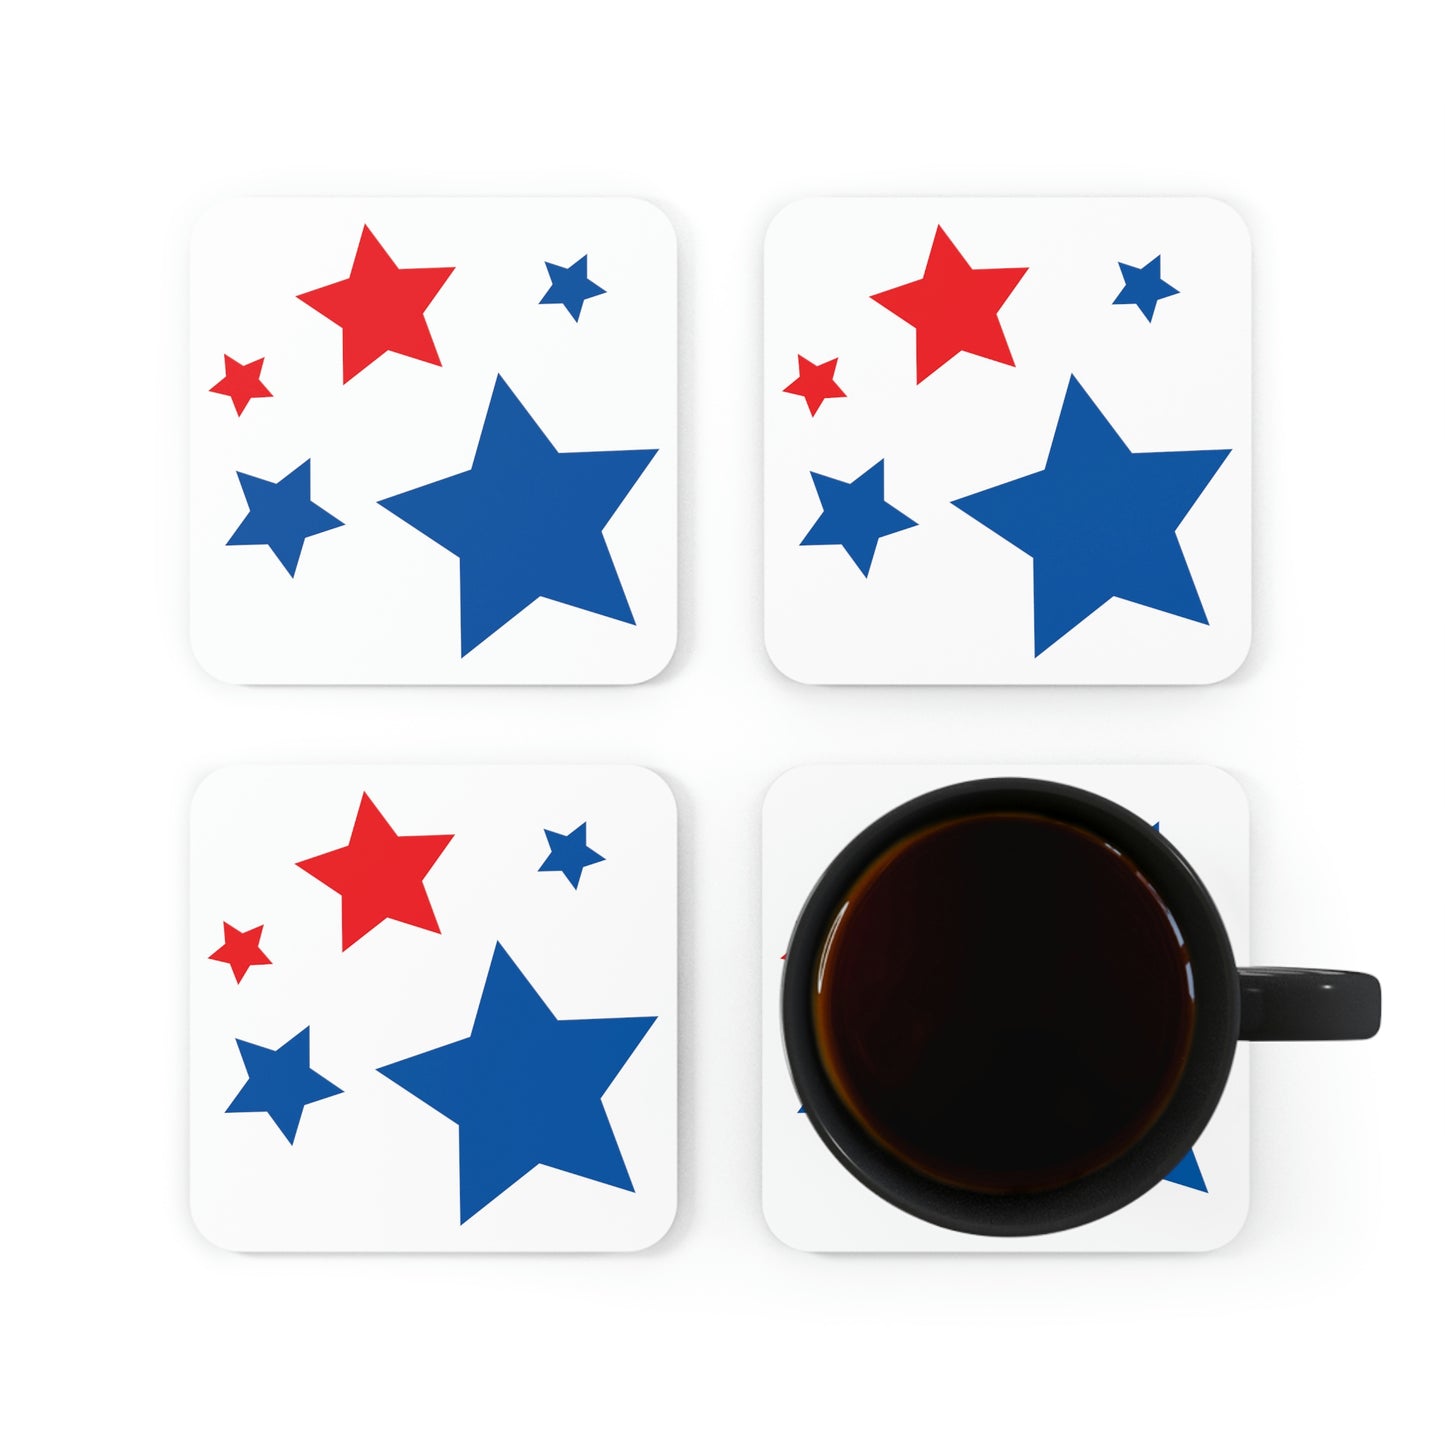 Overview of the 4 coasters with a mug